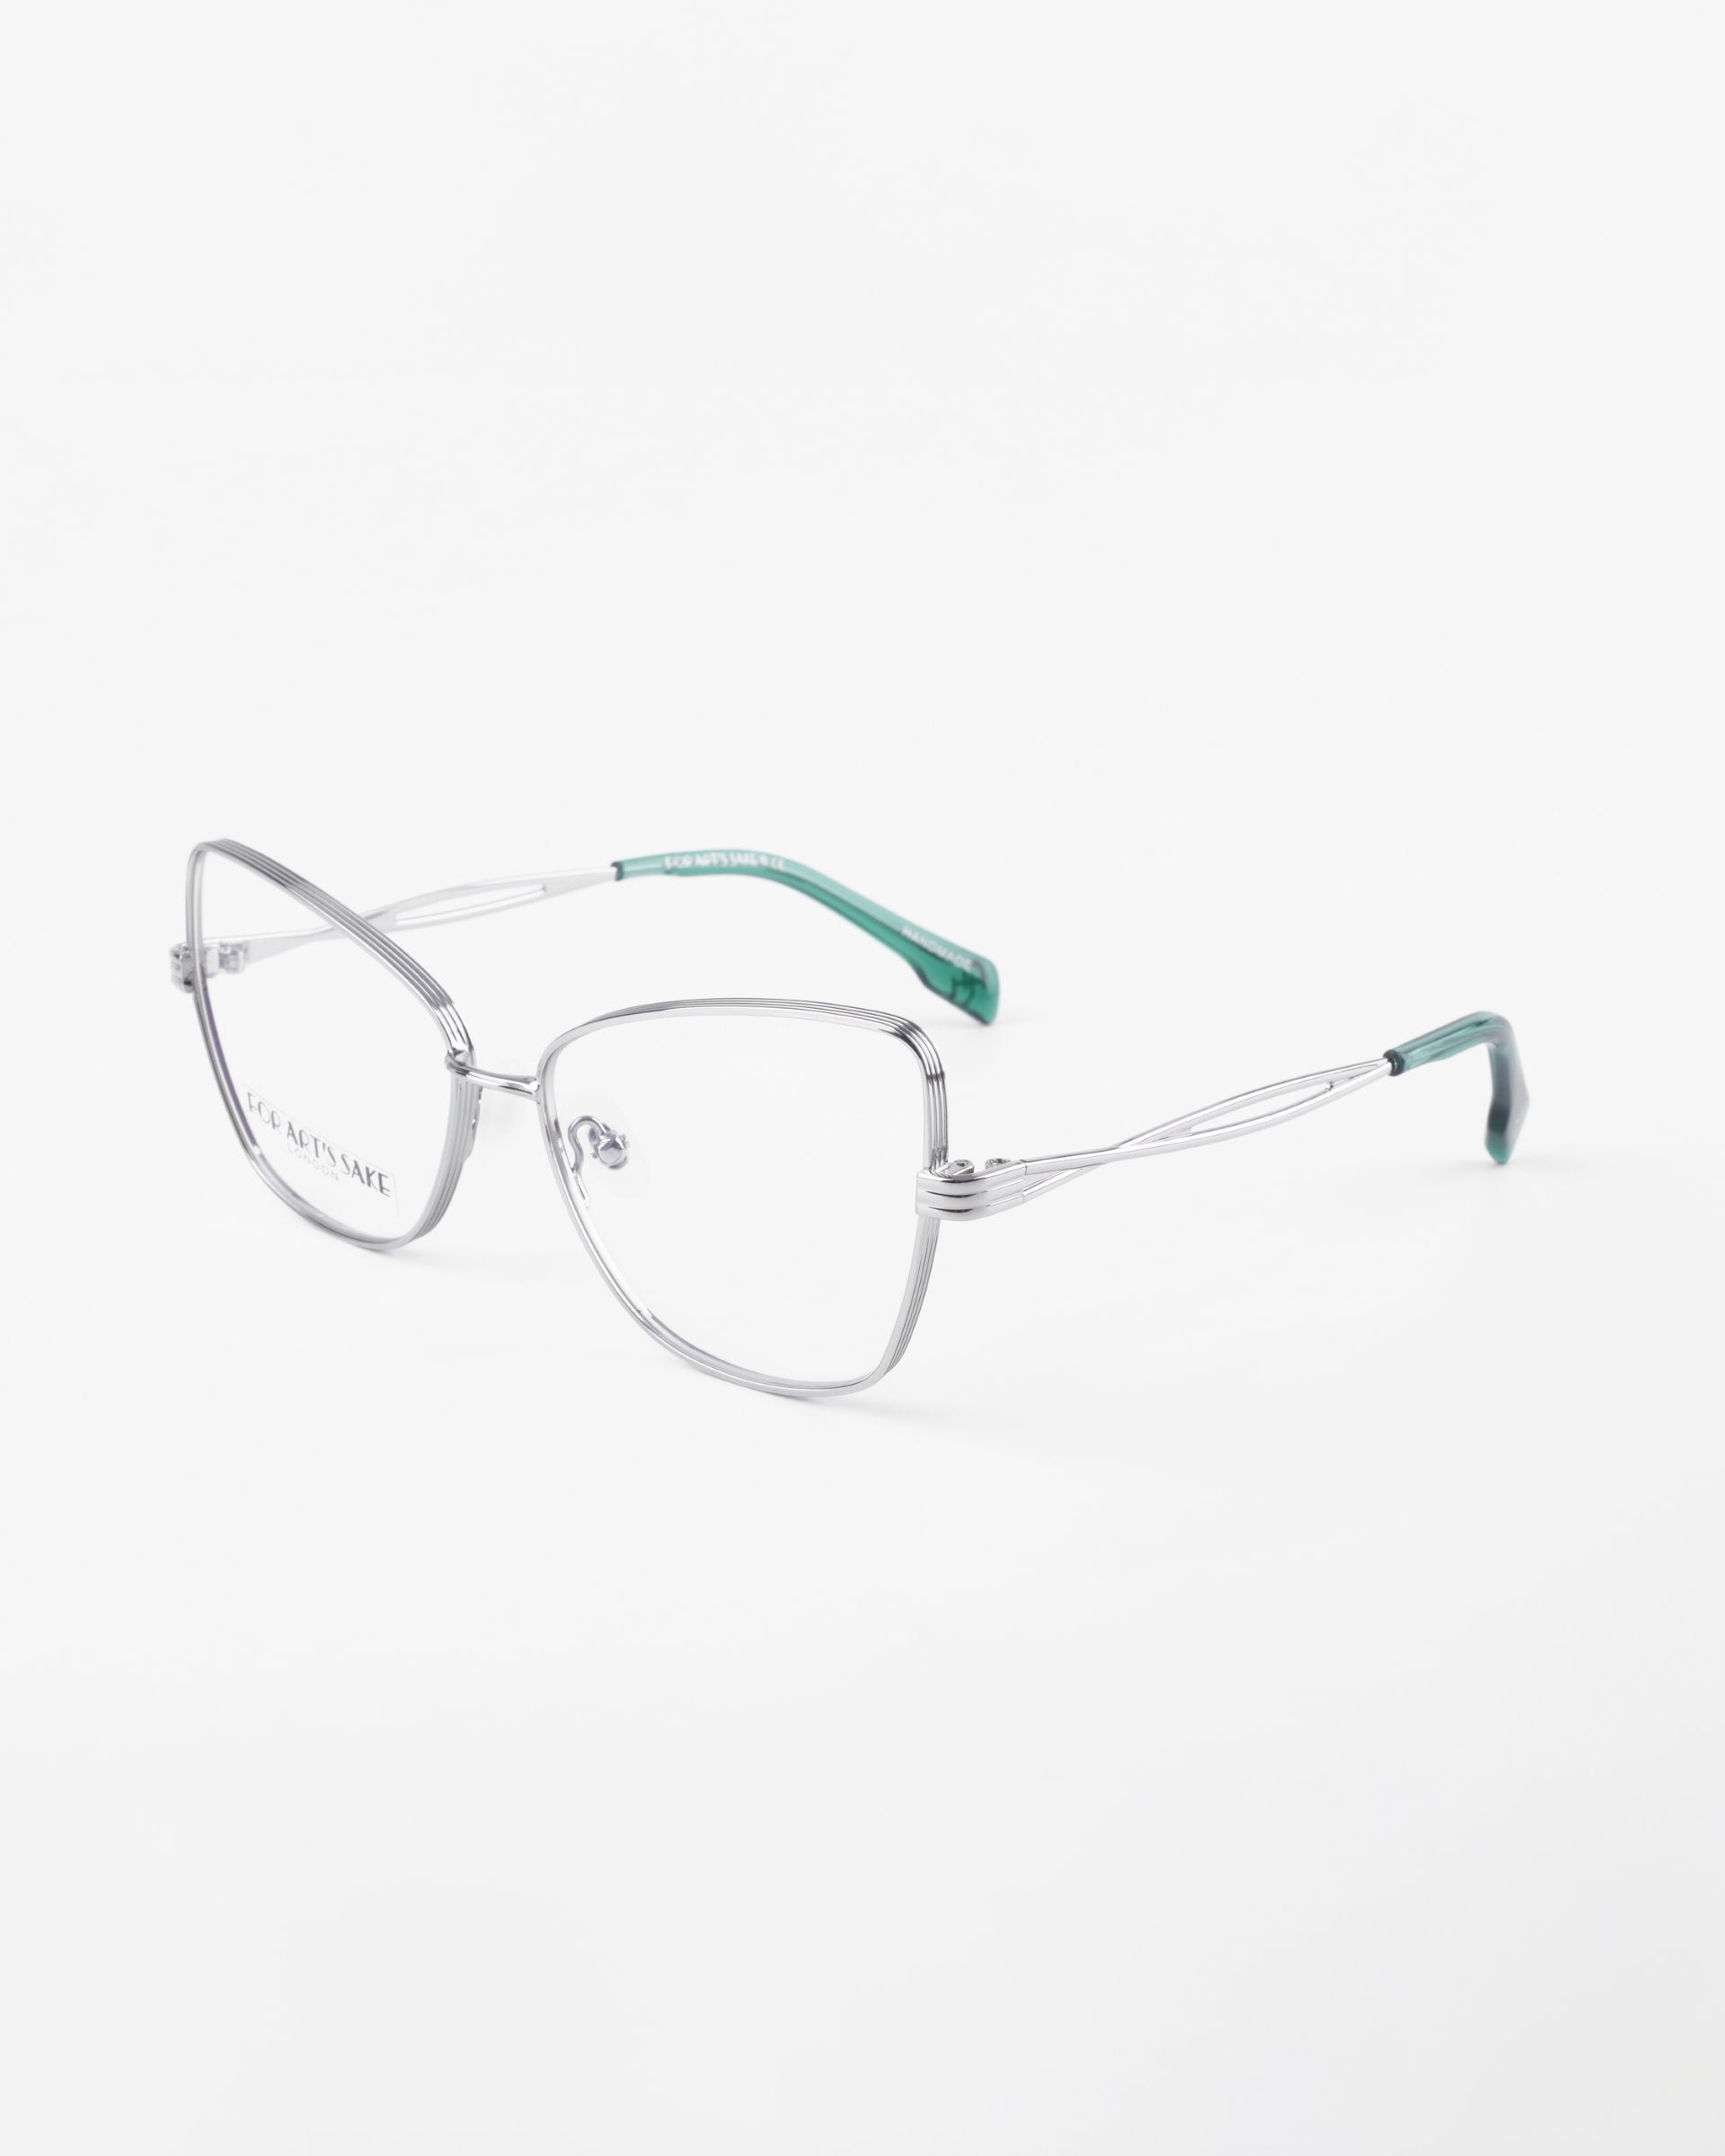 A pair of stylish eyeglasses with thin, silver metal frames and clear lenses. The temples are predominantly silver with green tips. Featuring a sleek, modern design suitable for everyday wear, the &quot;Lady&quot; frames by For Art&#39;s Sake® also offer an optional blue light filter. The background is plain white.